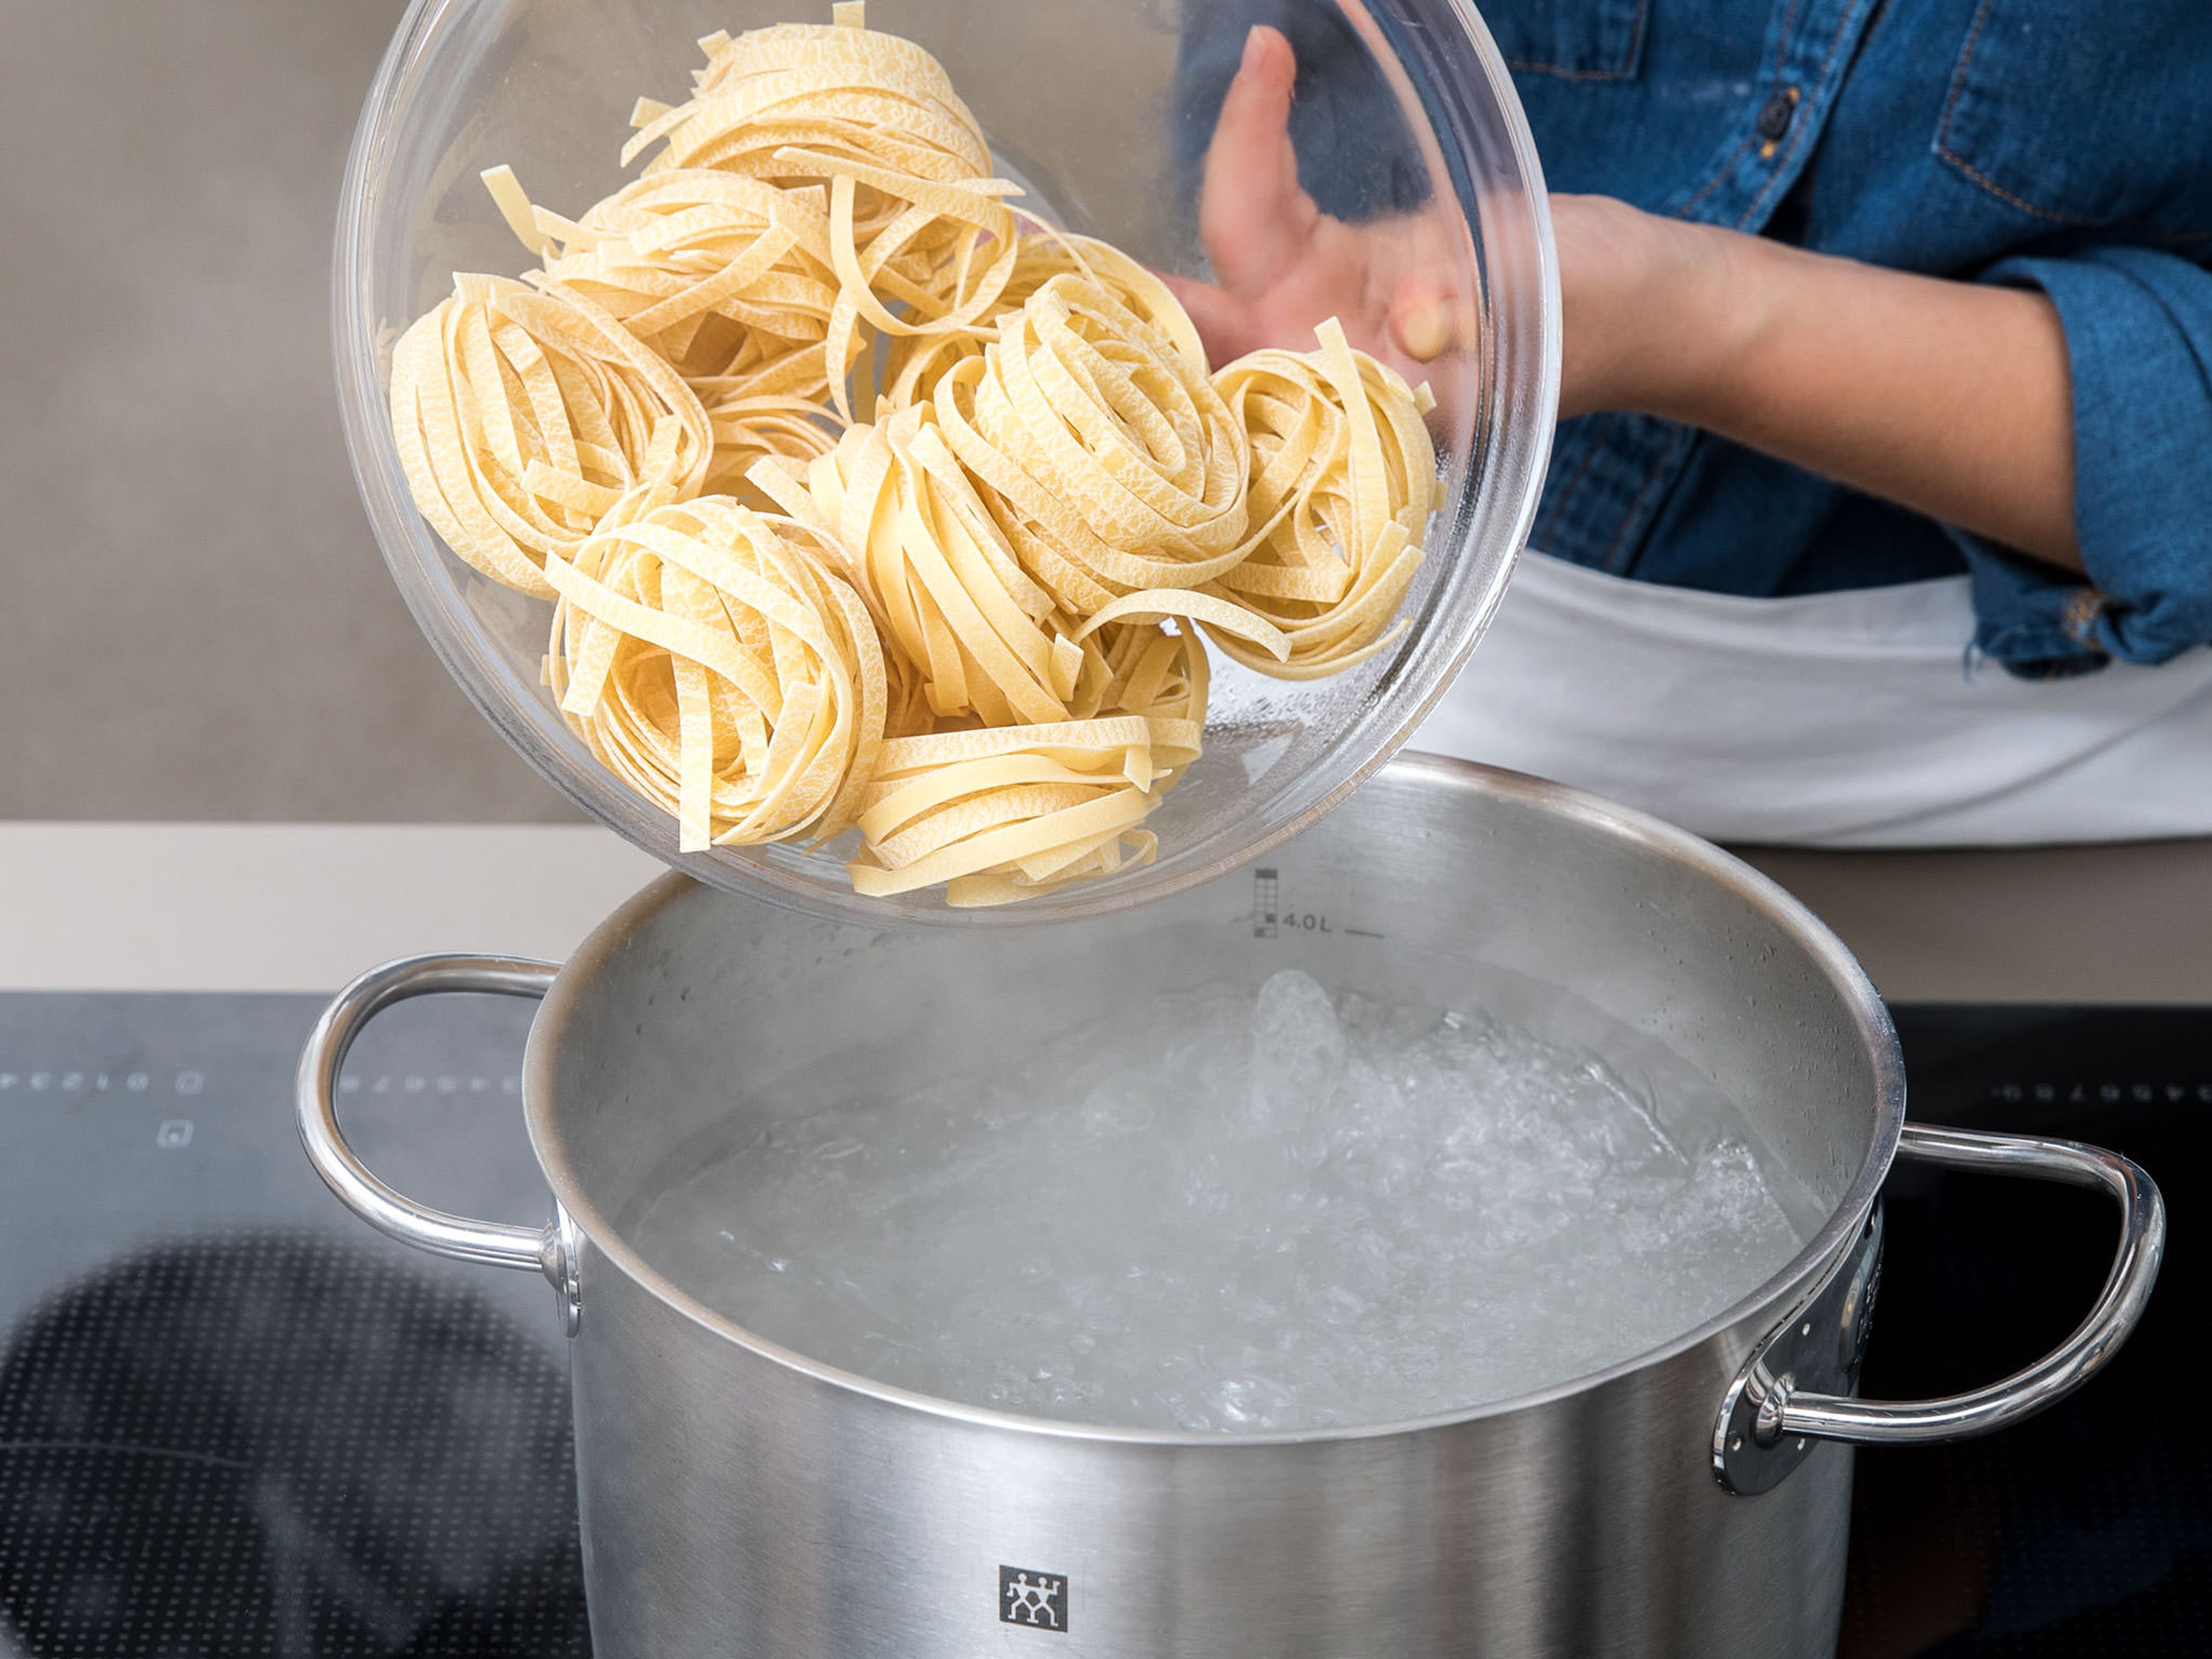 Bring salted water to a boil and cook tagliatelle according to package instructions. Drain and reserve approx. 100 ml /0.5 cup of the cooking water.